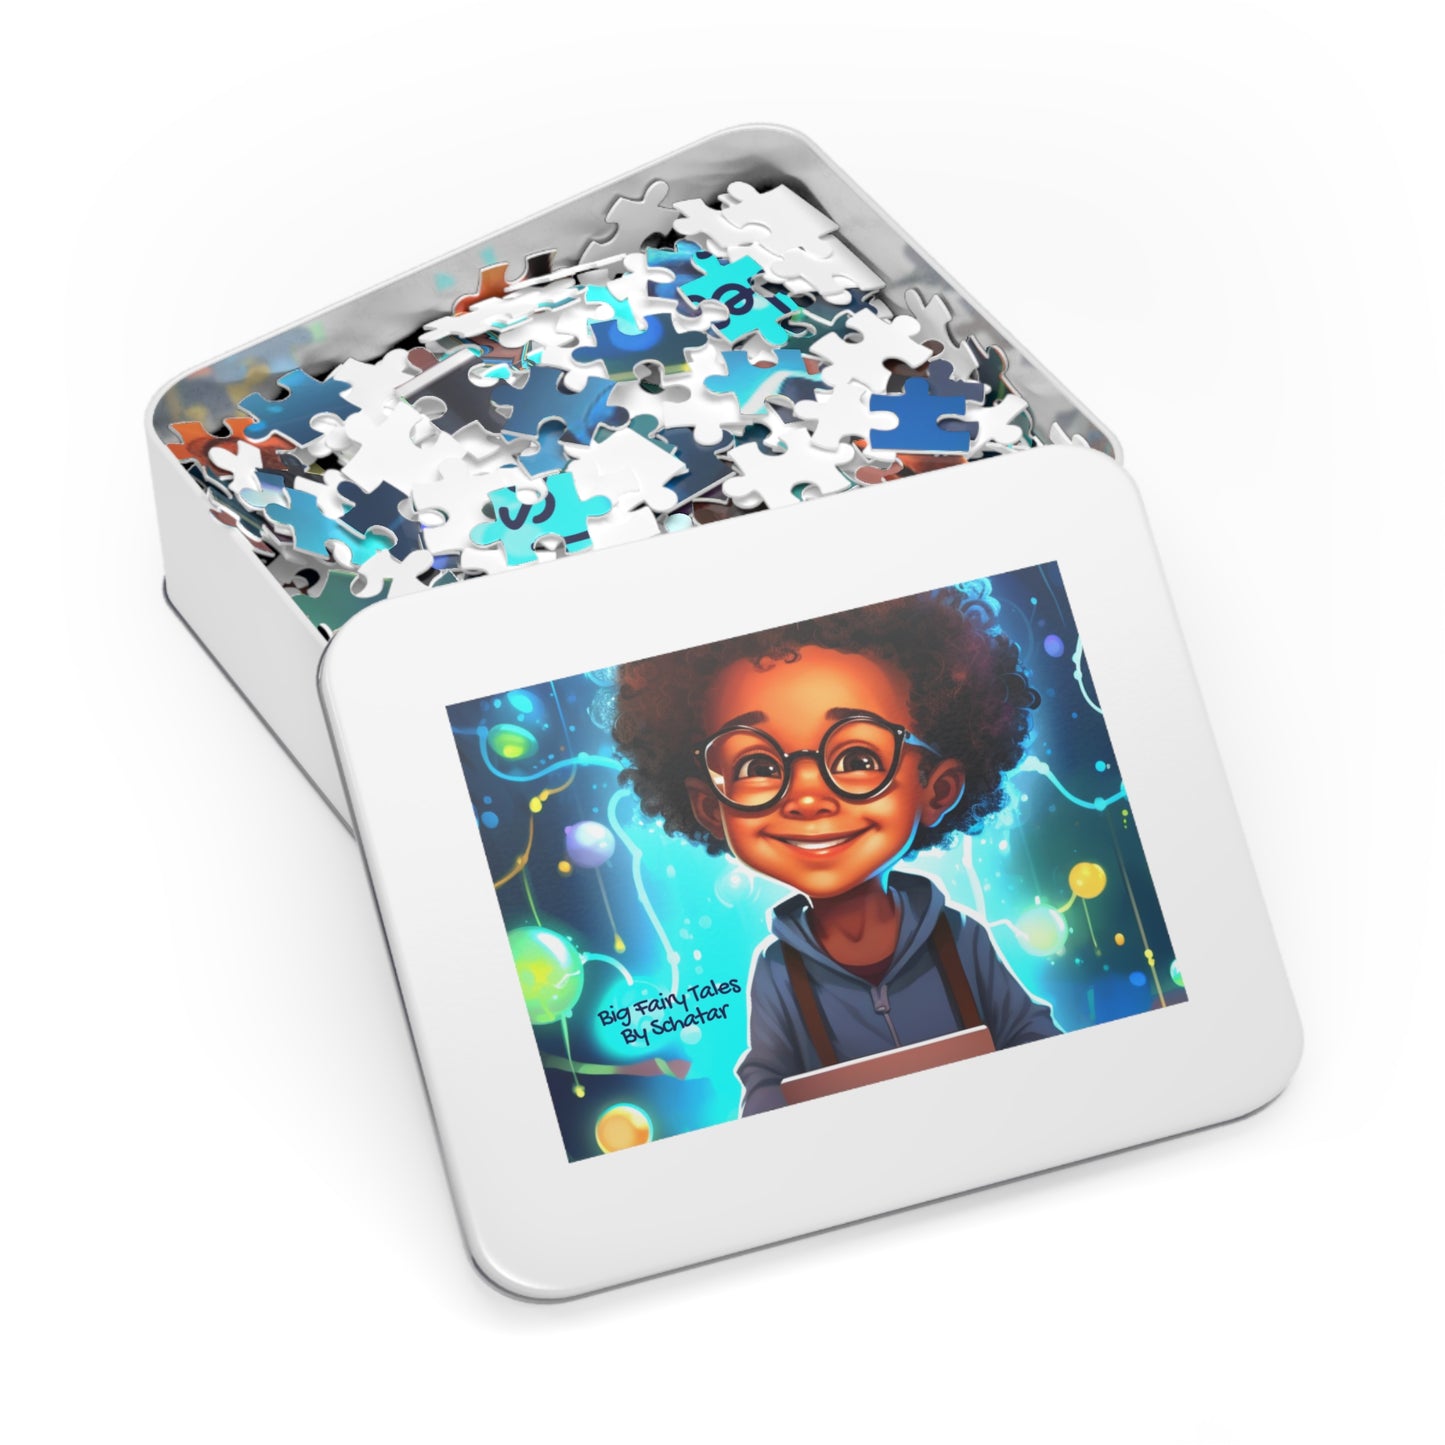 Computer Scientist - Big Little Professionals Puzzle 2 From Big Fairy Tales By Schatar